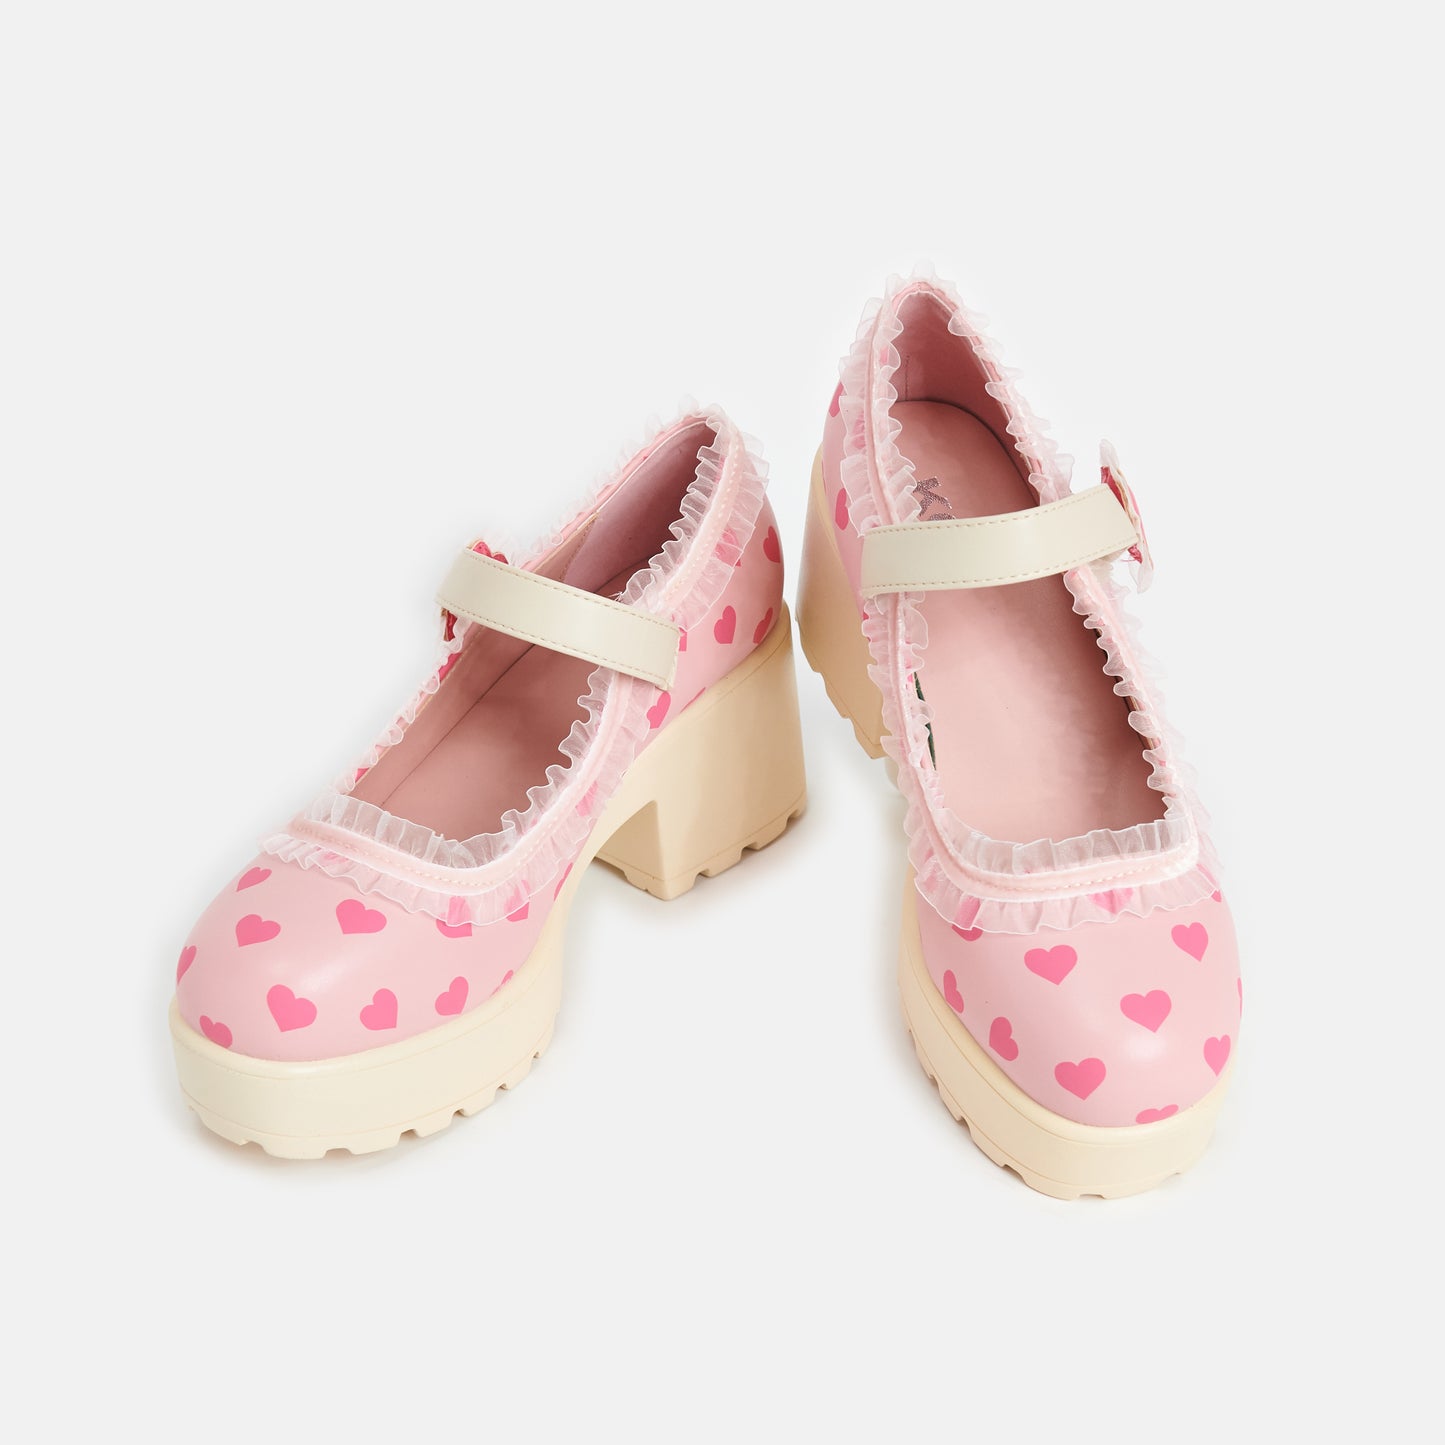 Tira Mary Jane Shoes 'Melanie Sweetheart Edition' - Mary Janes - KOI Footwear - Beige - Top View